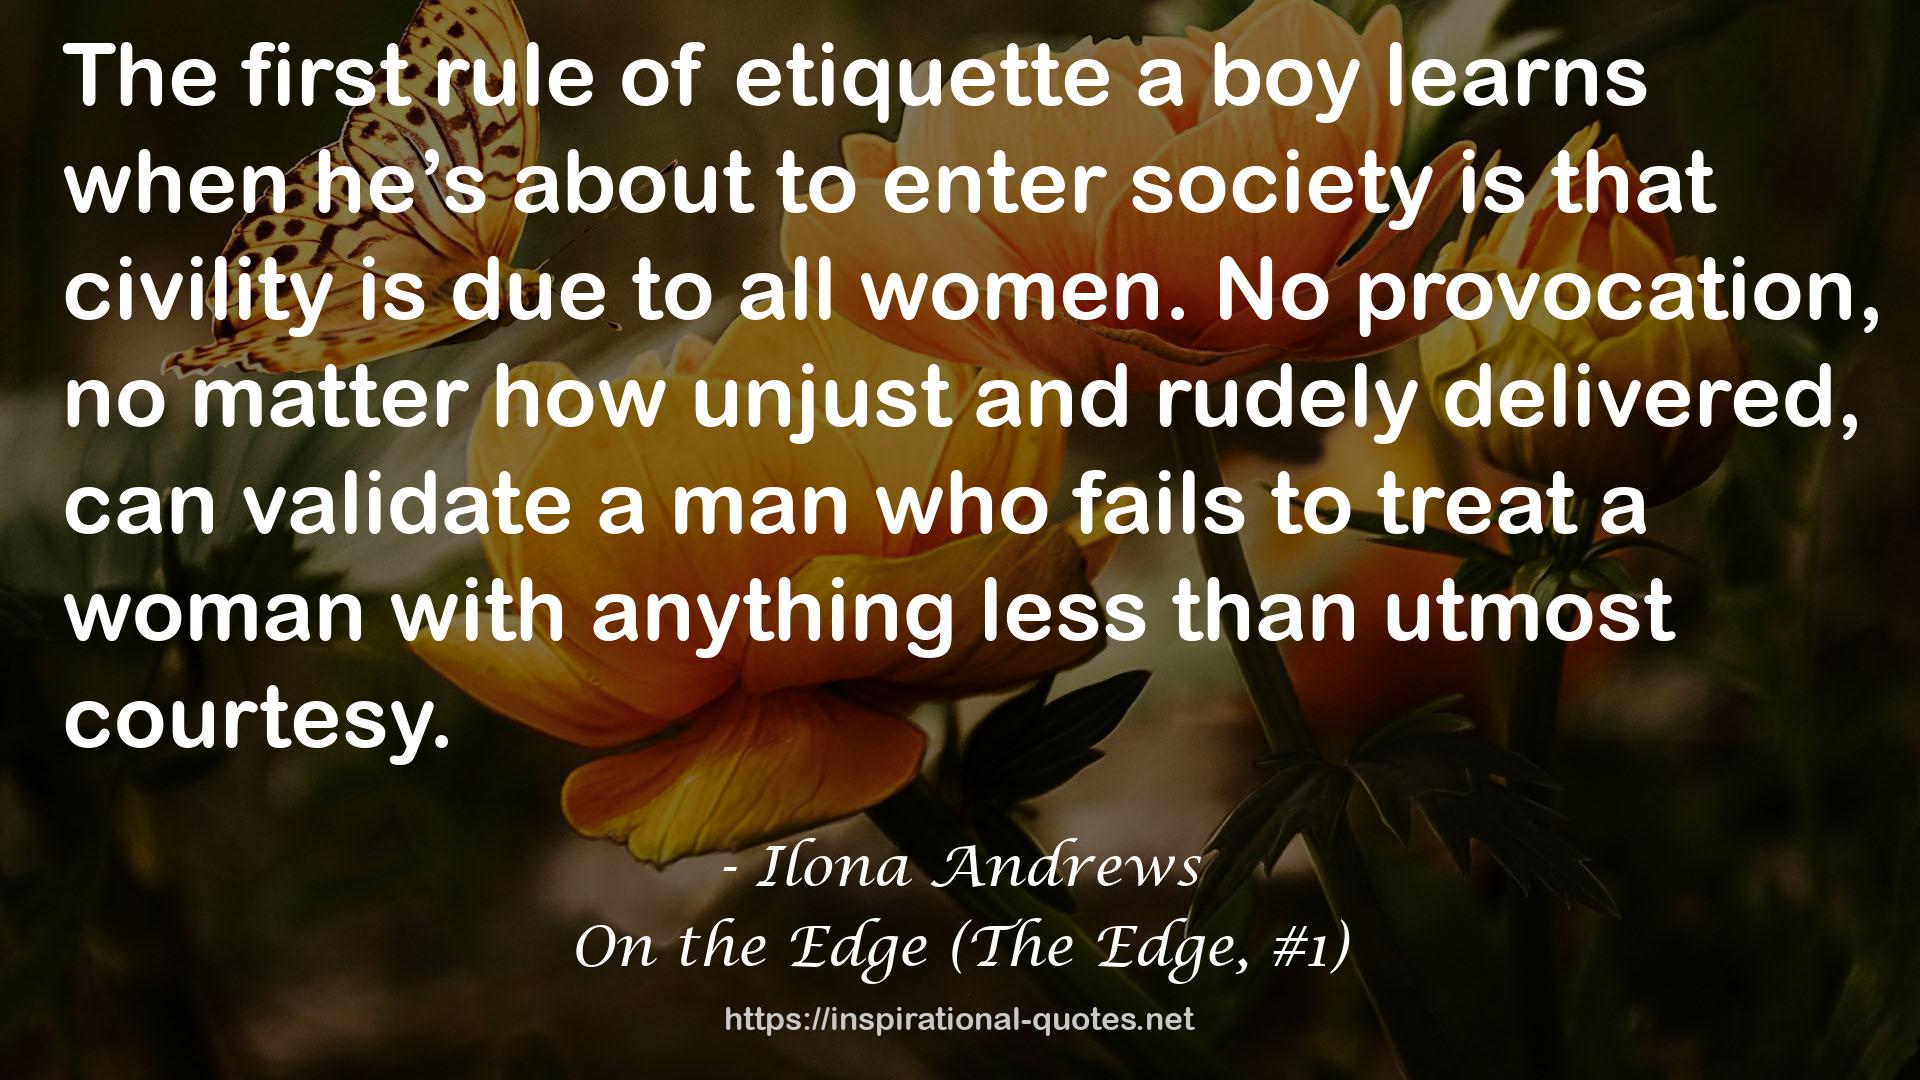 On the Edge (The Edge, #1) QUOTES